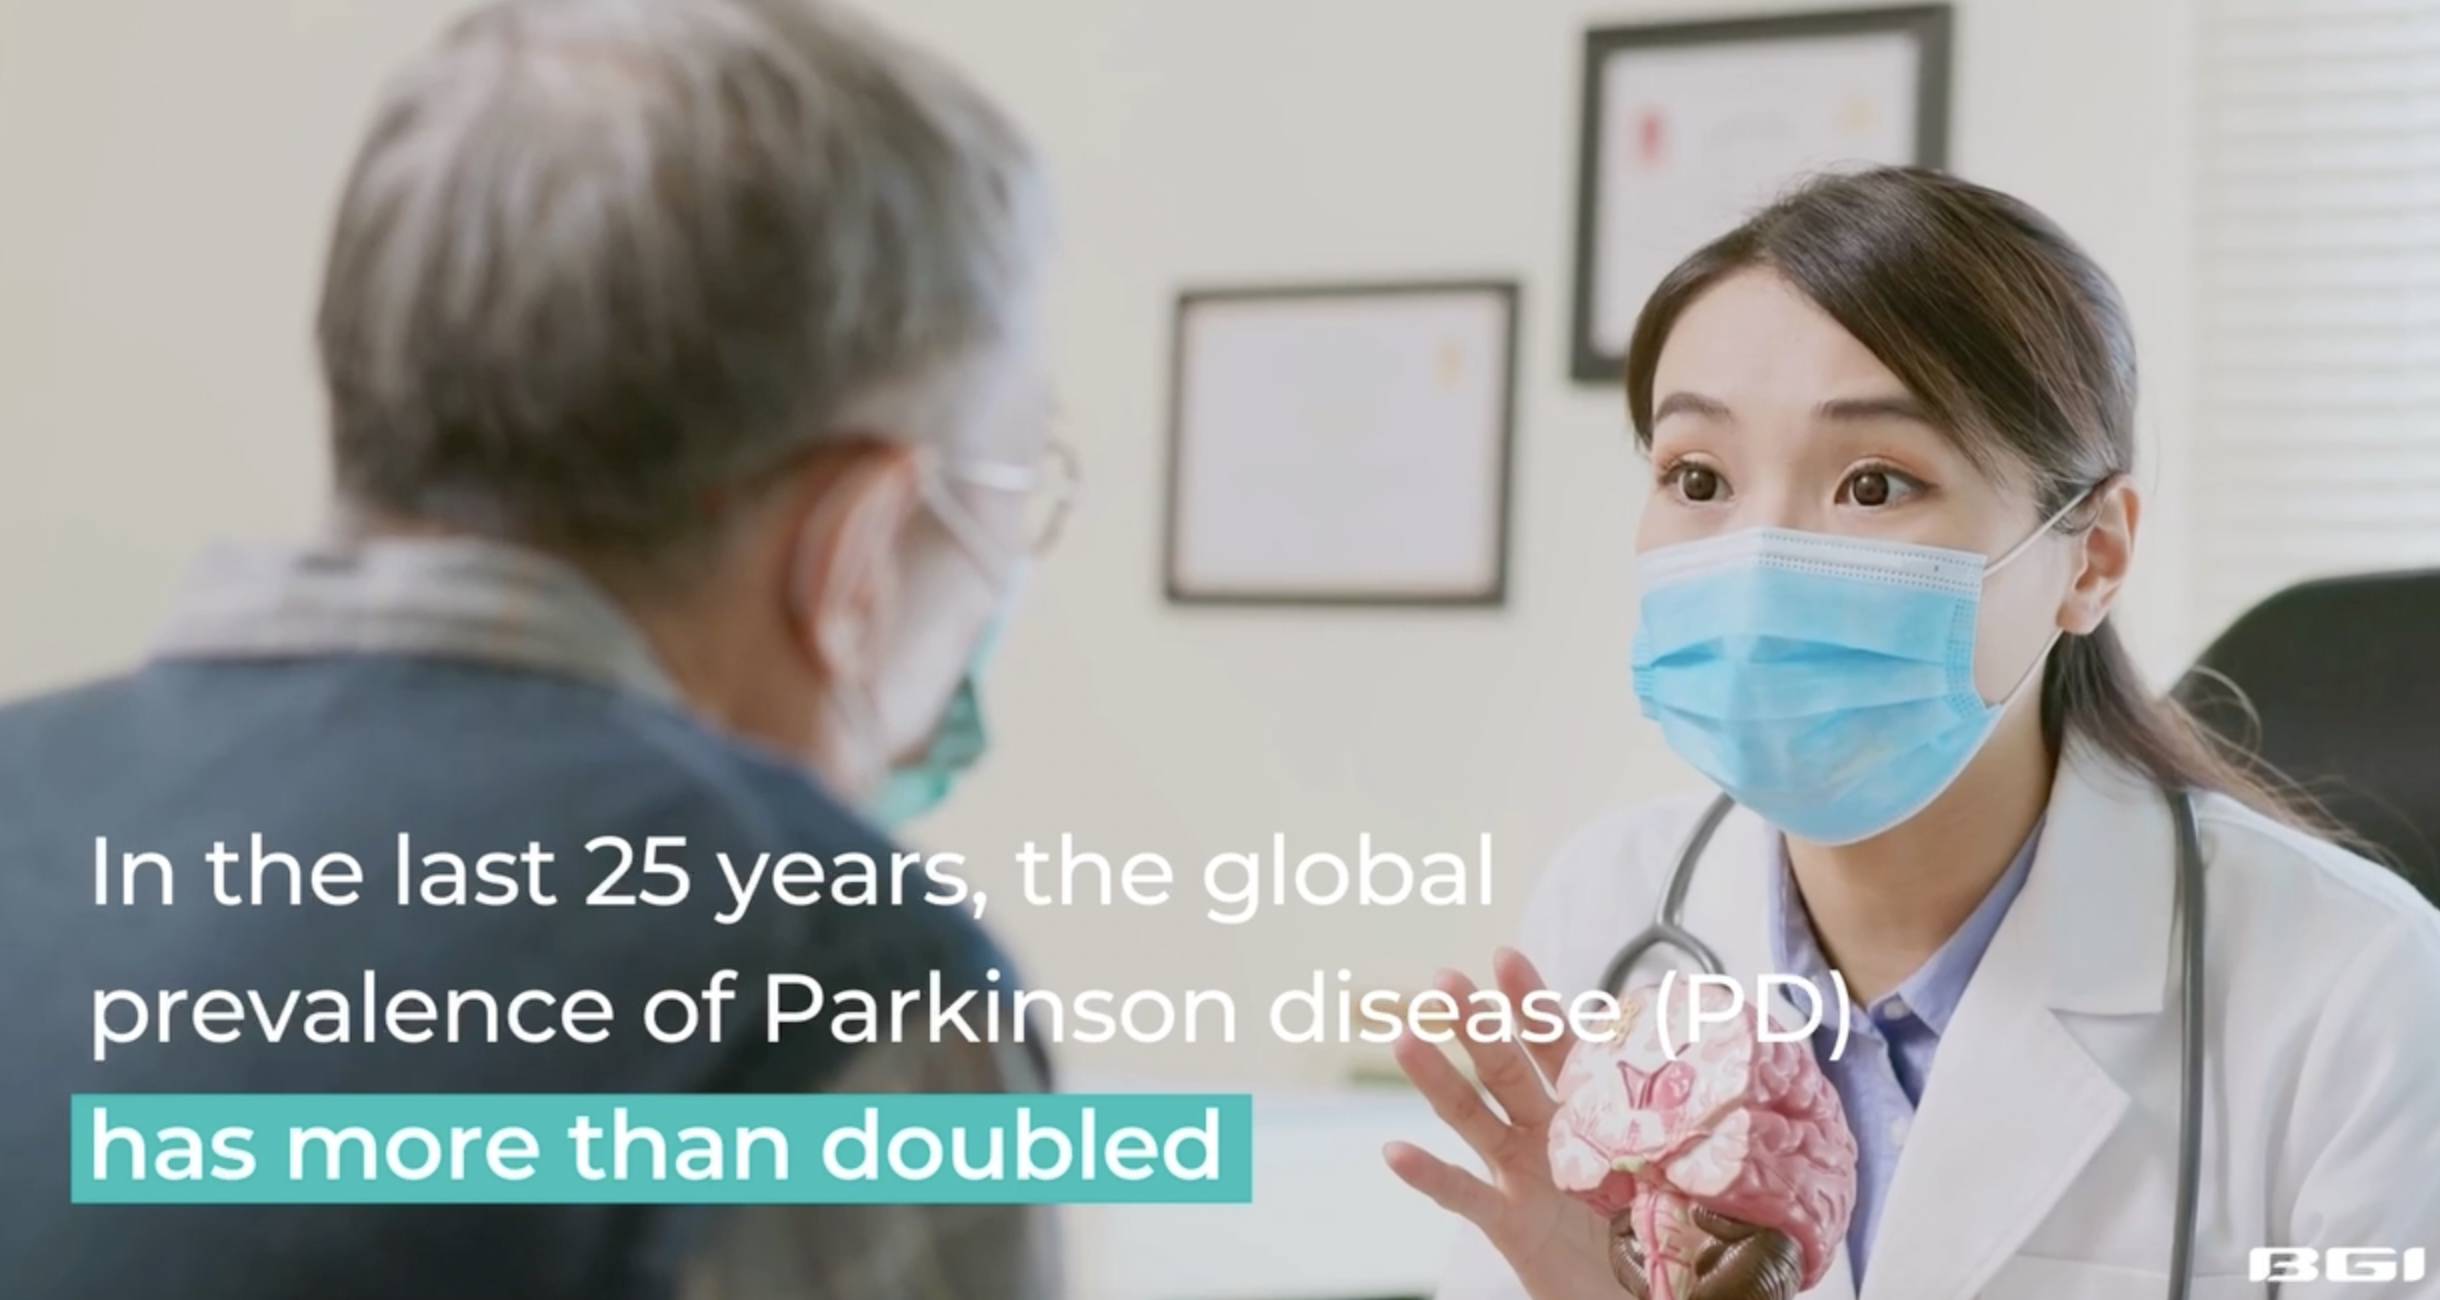 About 15 percent of people with Parkinson disease (PD) have a family history of the condition.